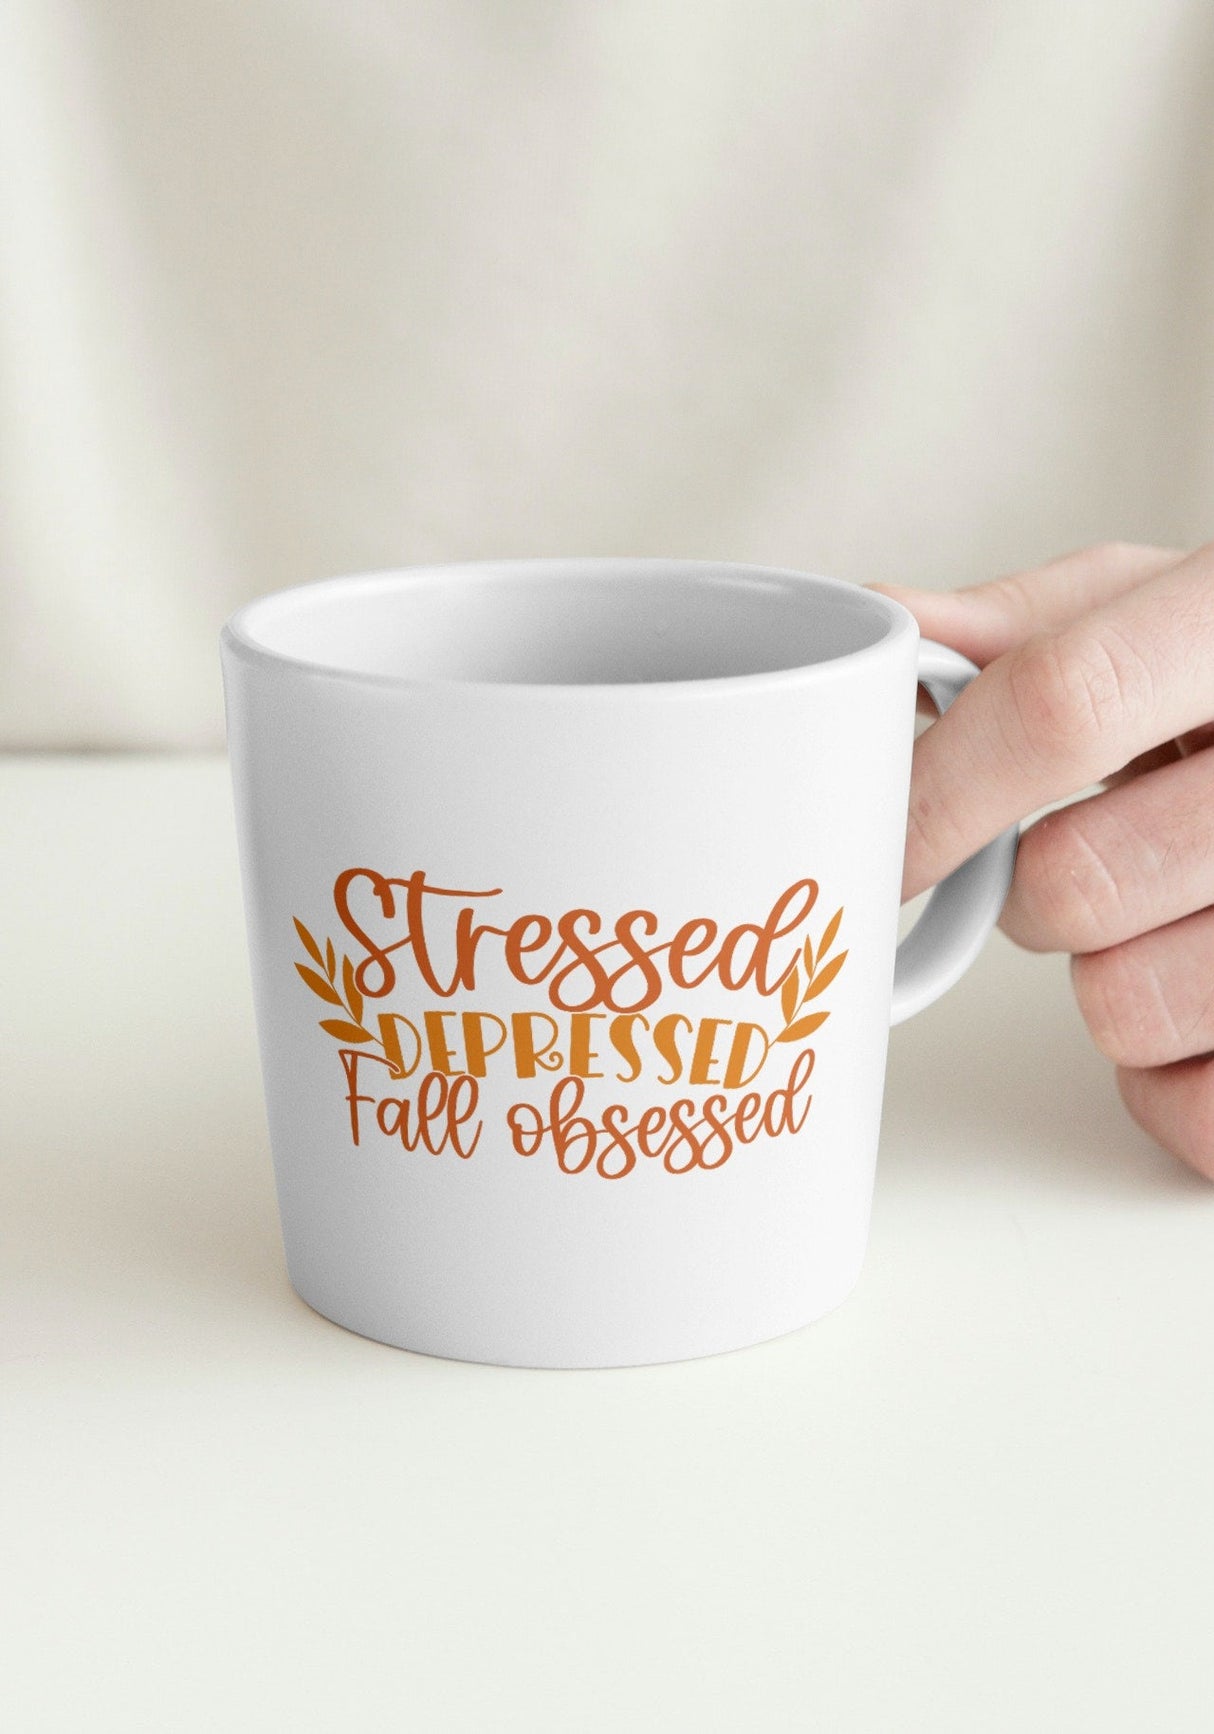 Stressed Depressed Fall Obsessed SVG Cut File